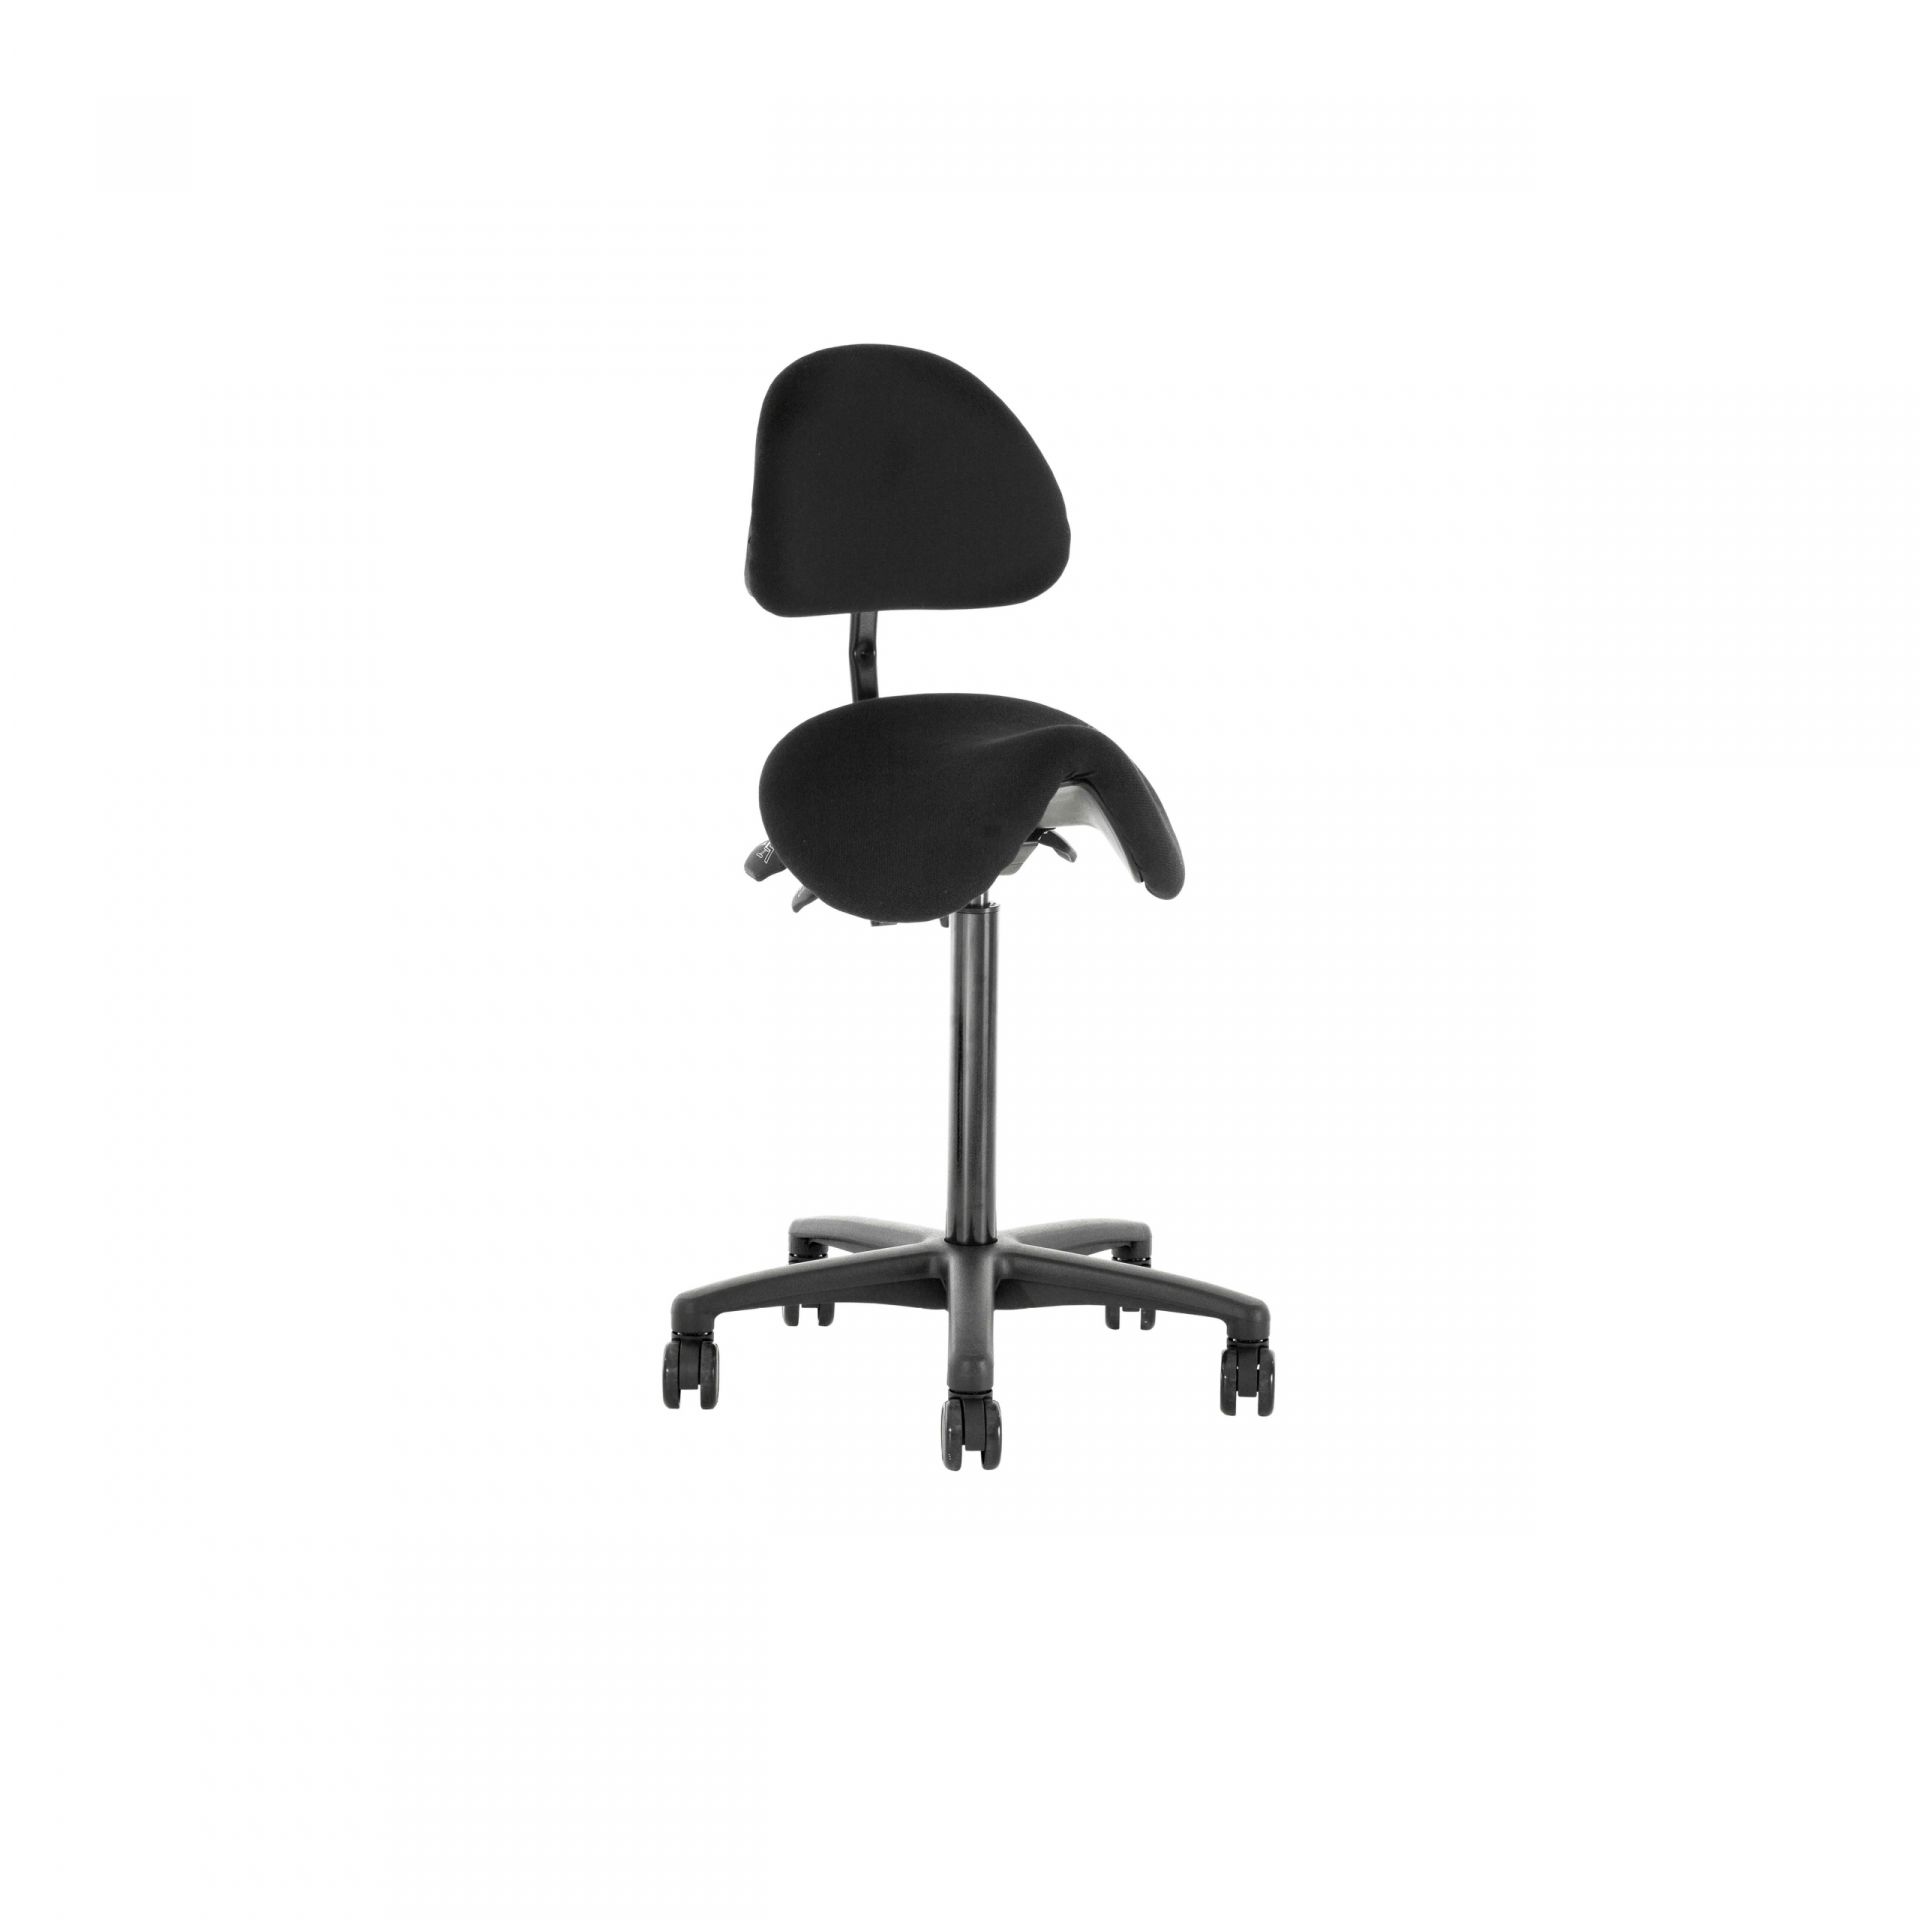 Saddle seat Office chair with saddle seat product image 1